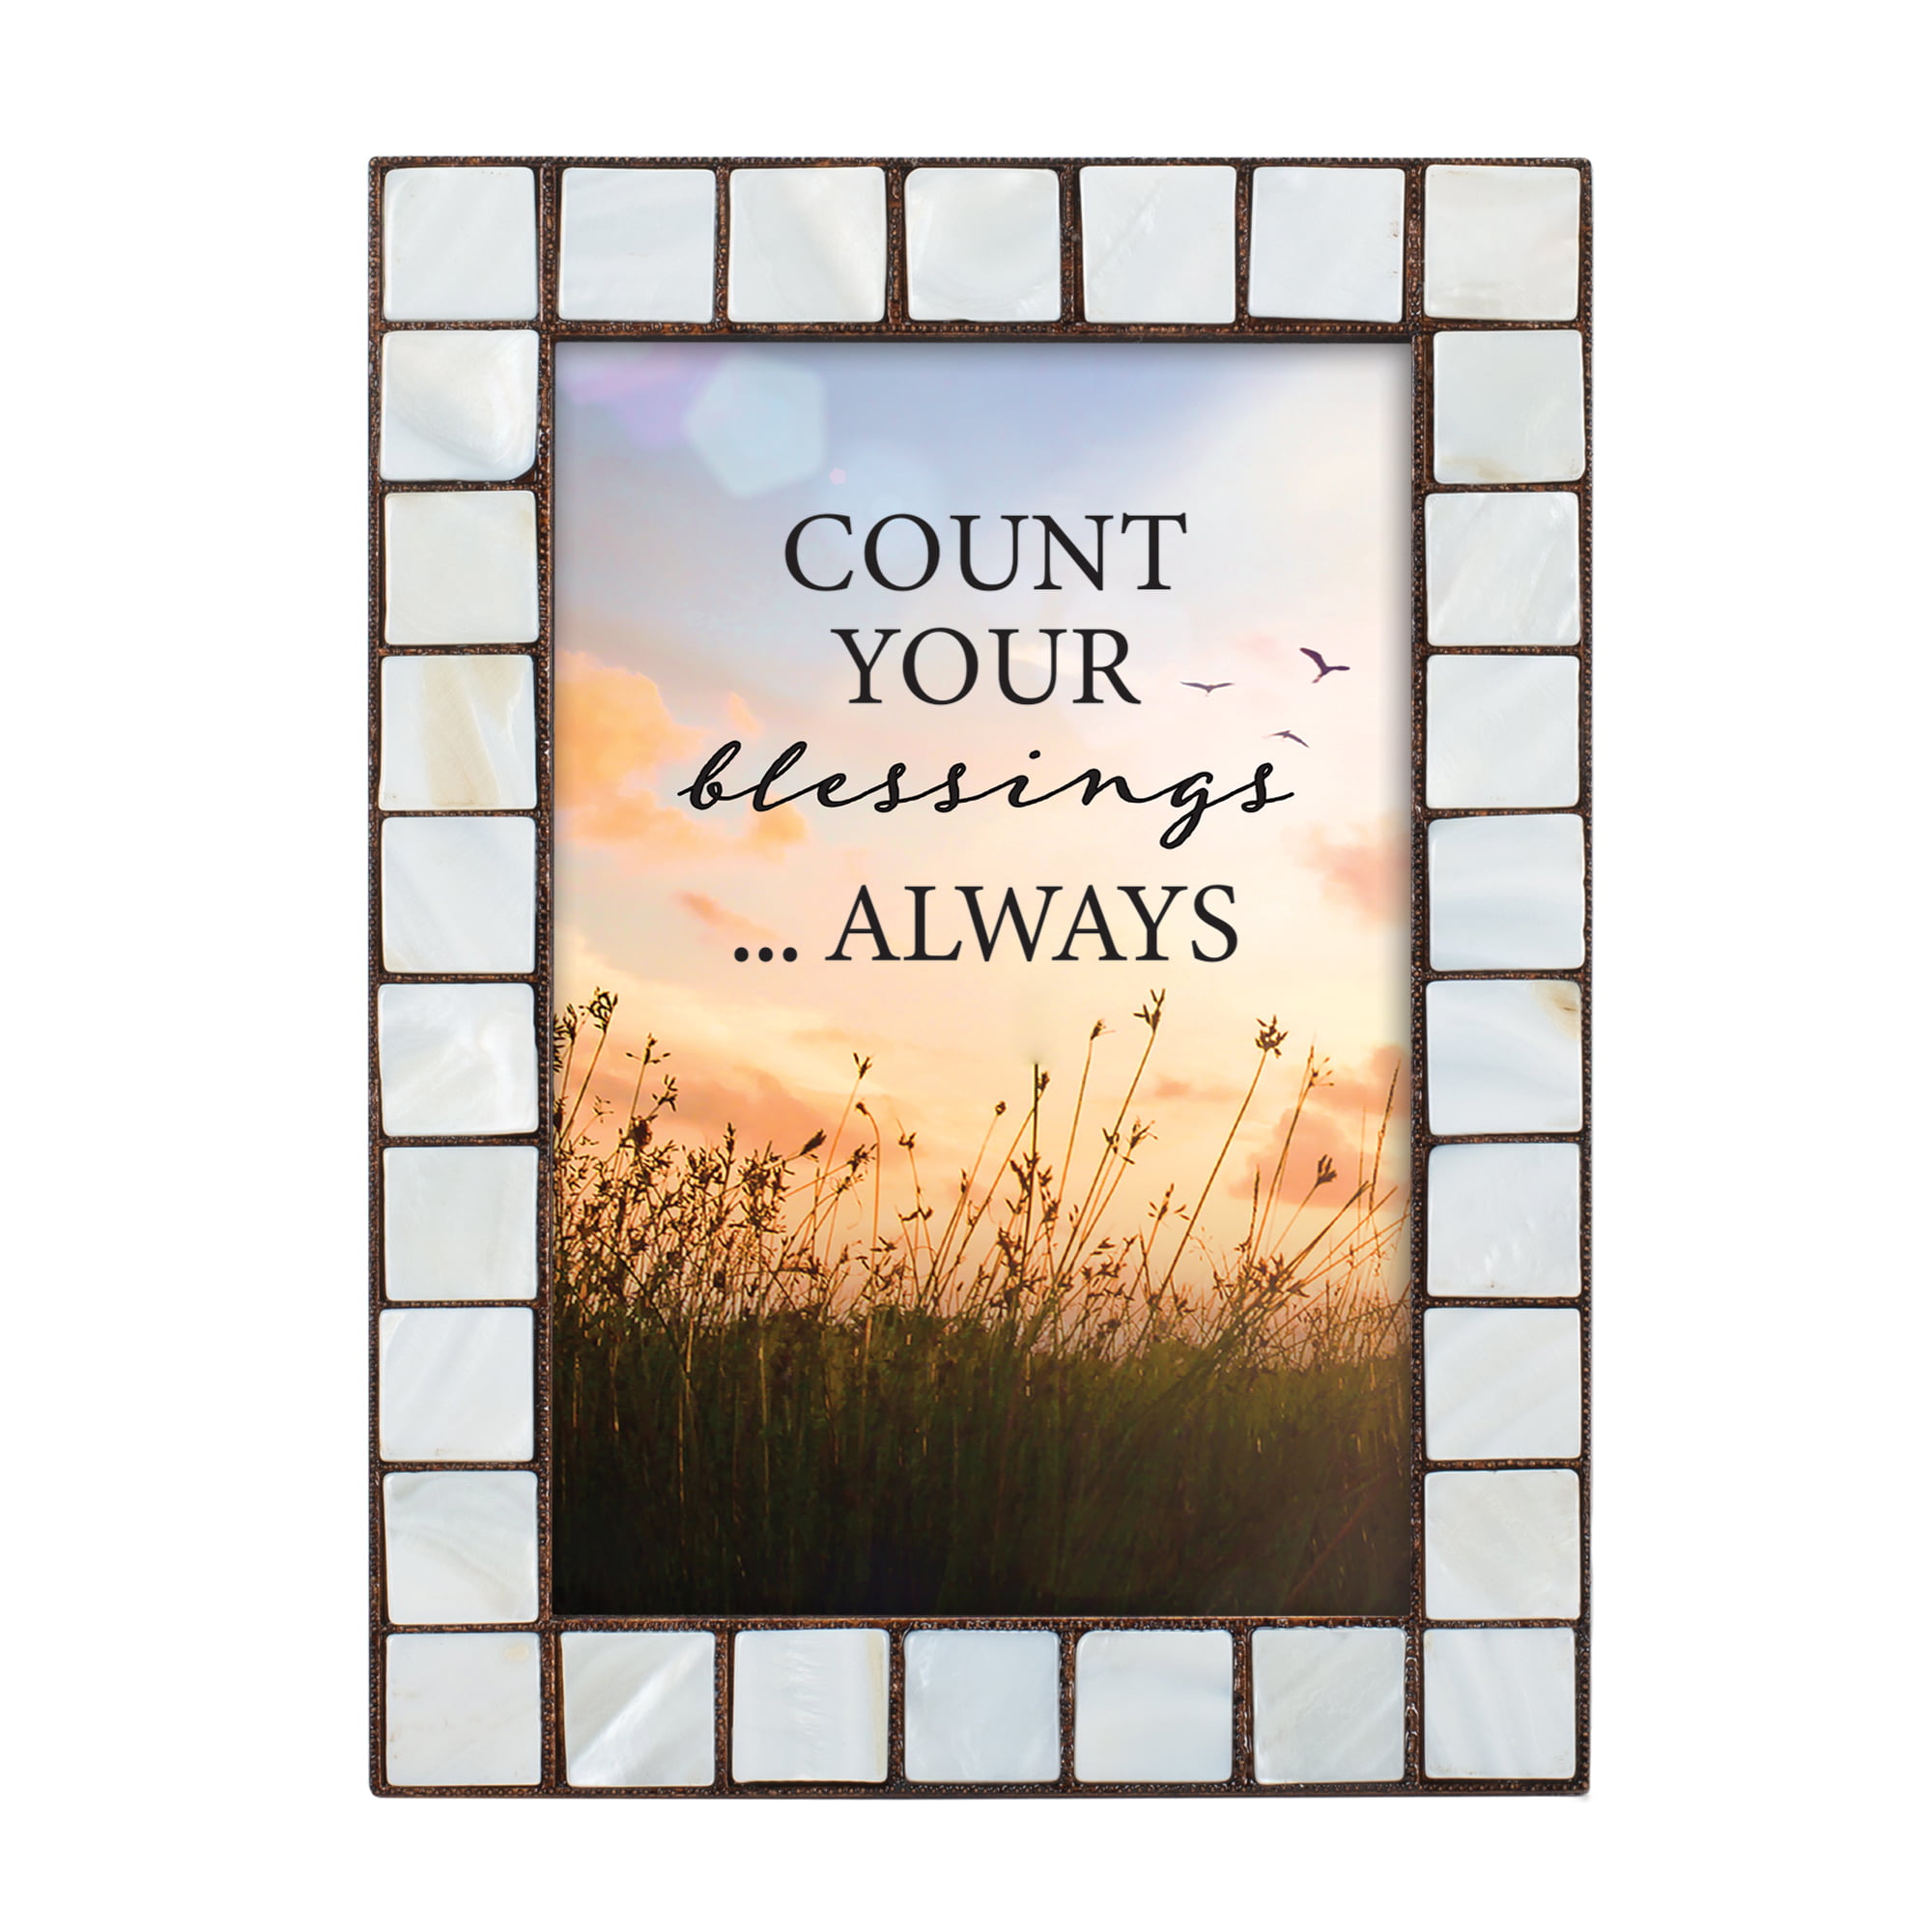 Cottage Garden Love is Always Home Black Beaded Board 5 x 7 Table Top and Wall Photo Frame